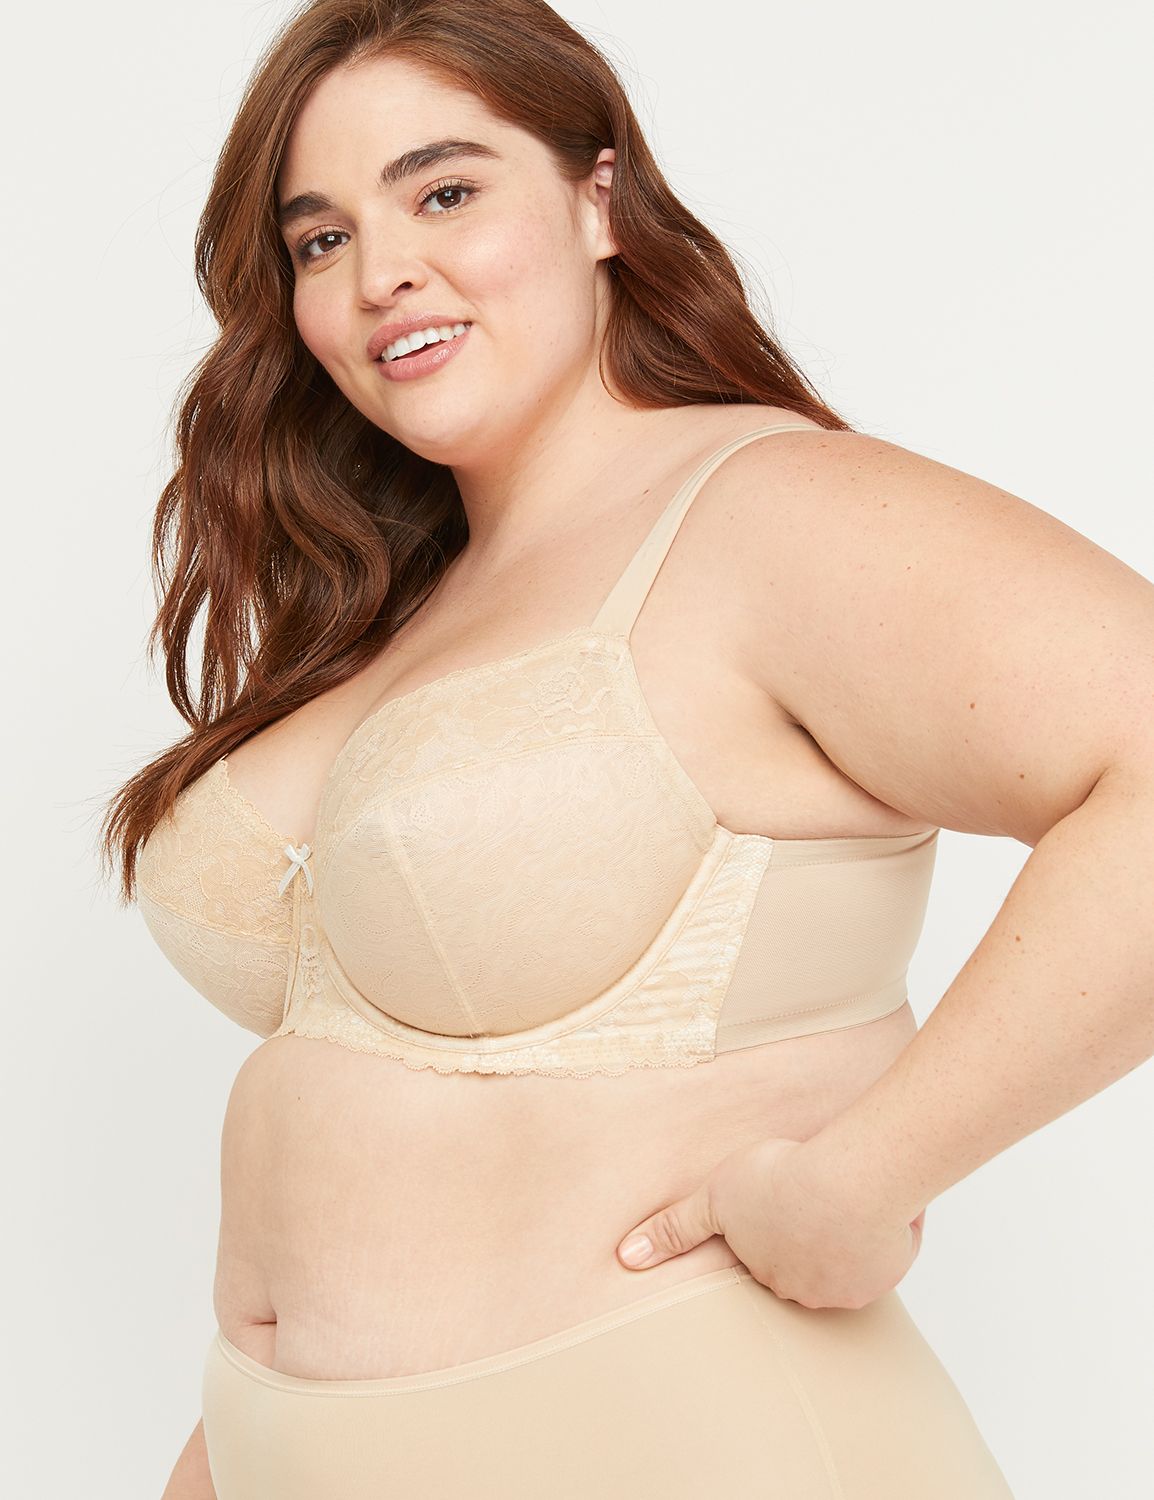 Lace Unlined Full Coverage Bra1130026:Cafe Mocha LBS 2365:34I